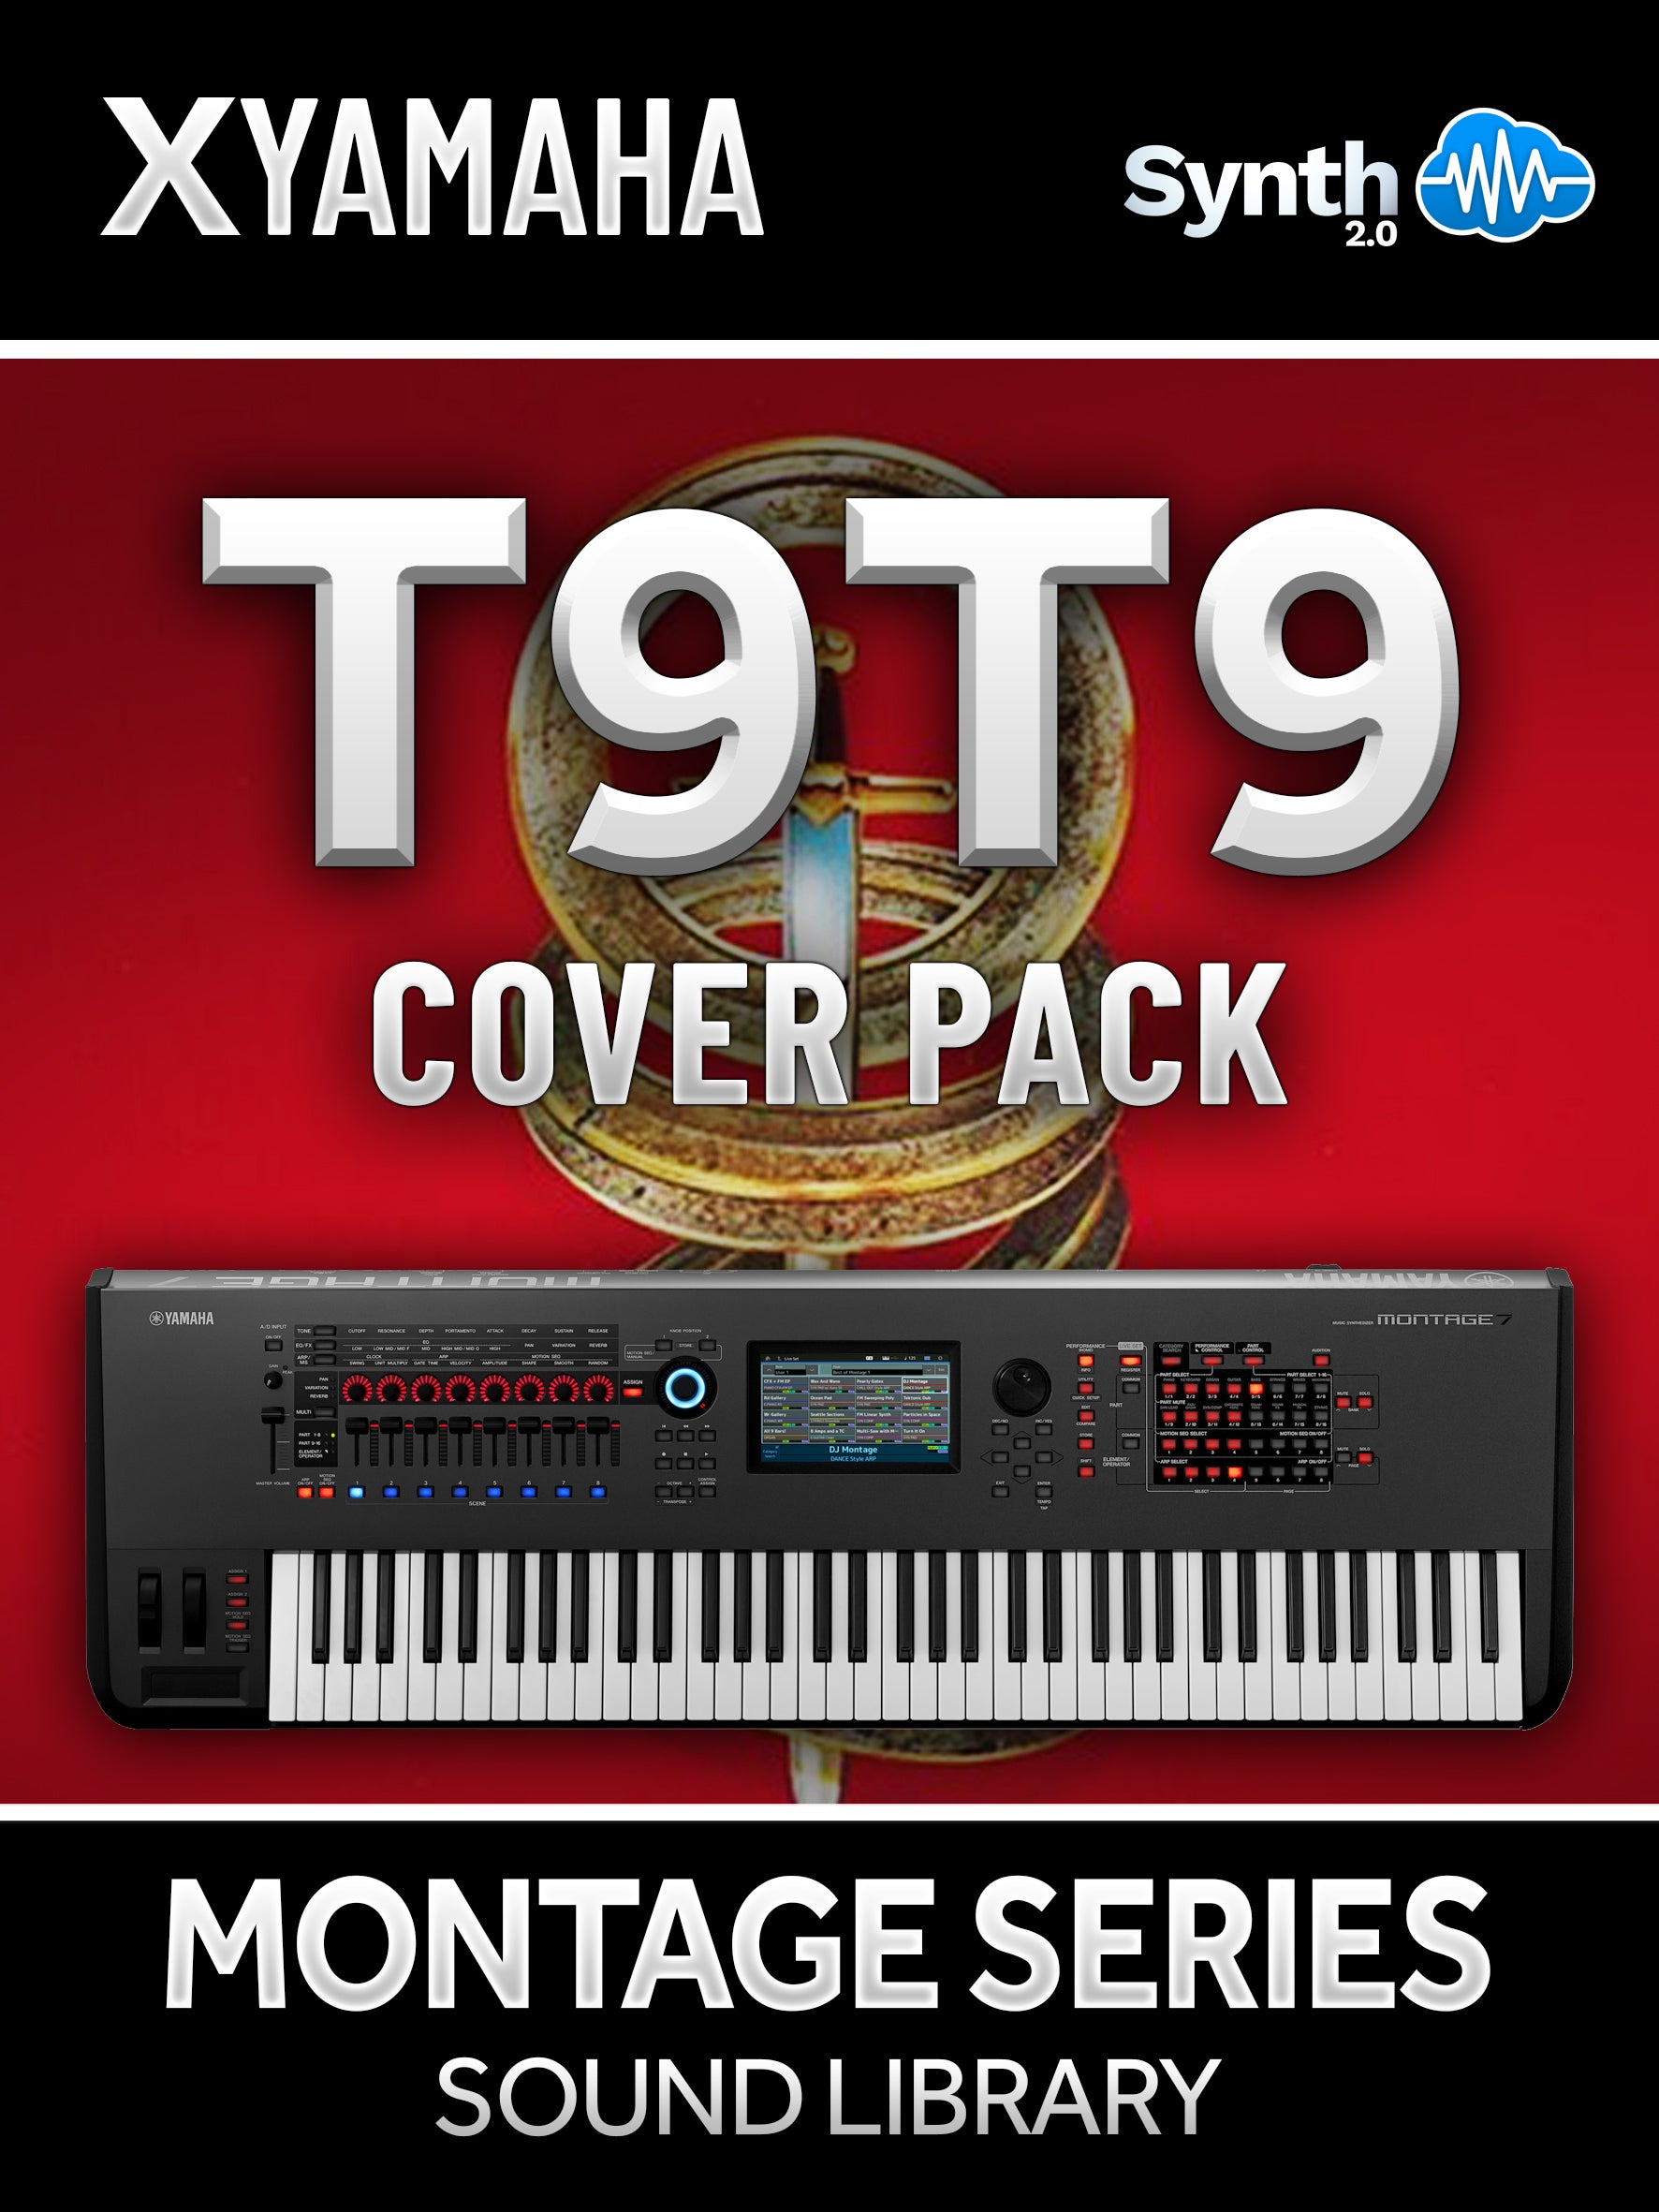 LDX121 - T9T9 Cover Pack - Yamaha MONTAGE / M ( 15 presets )